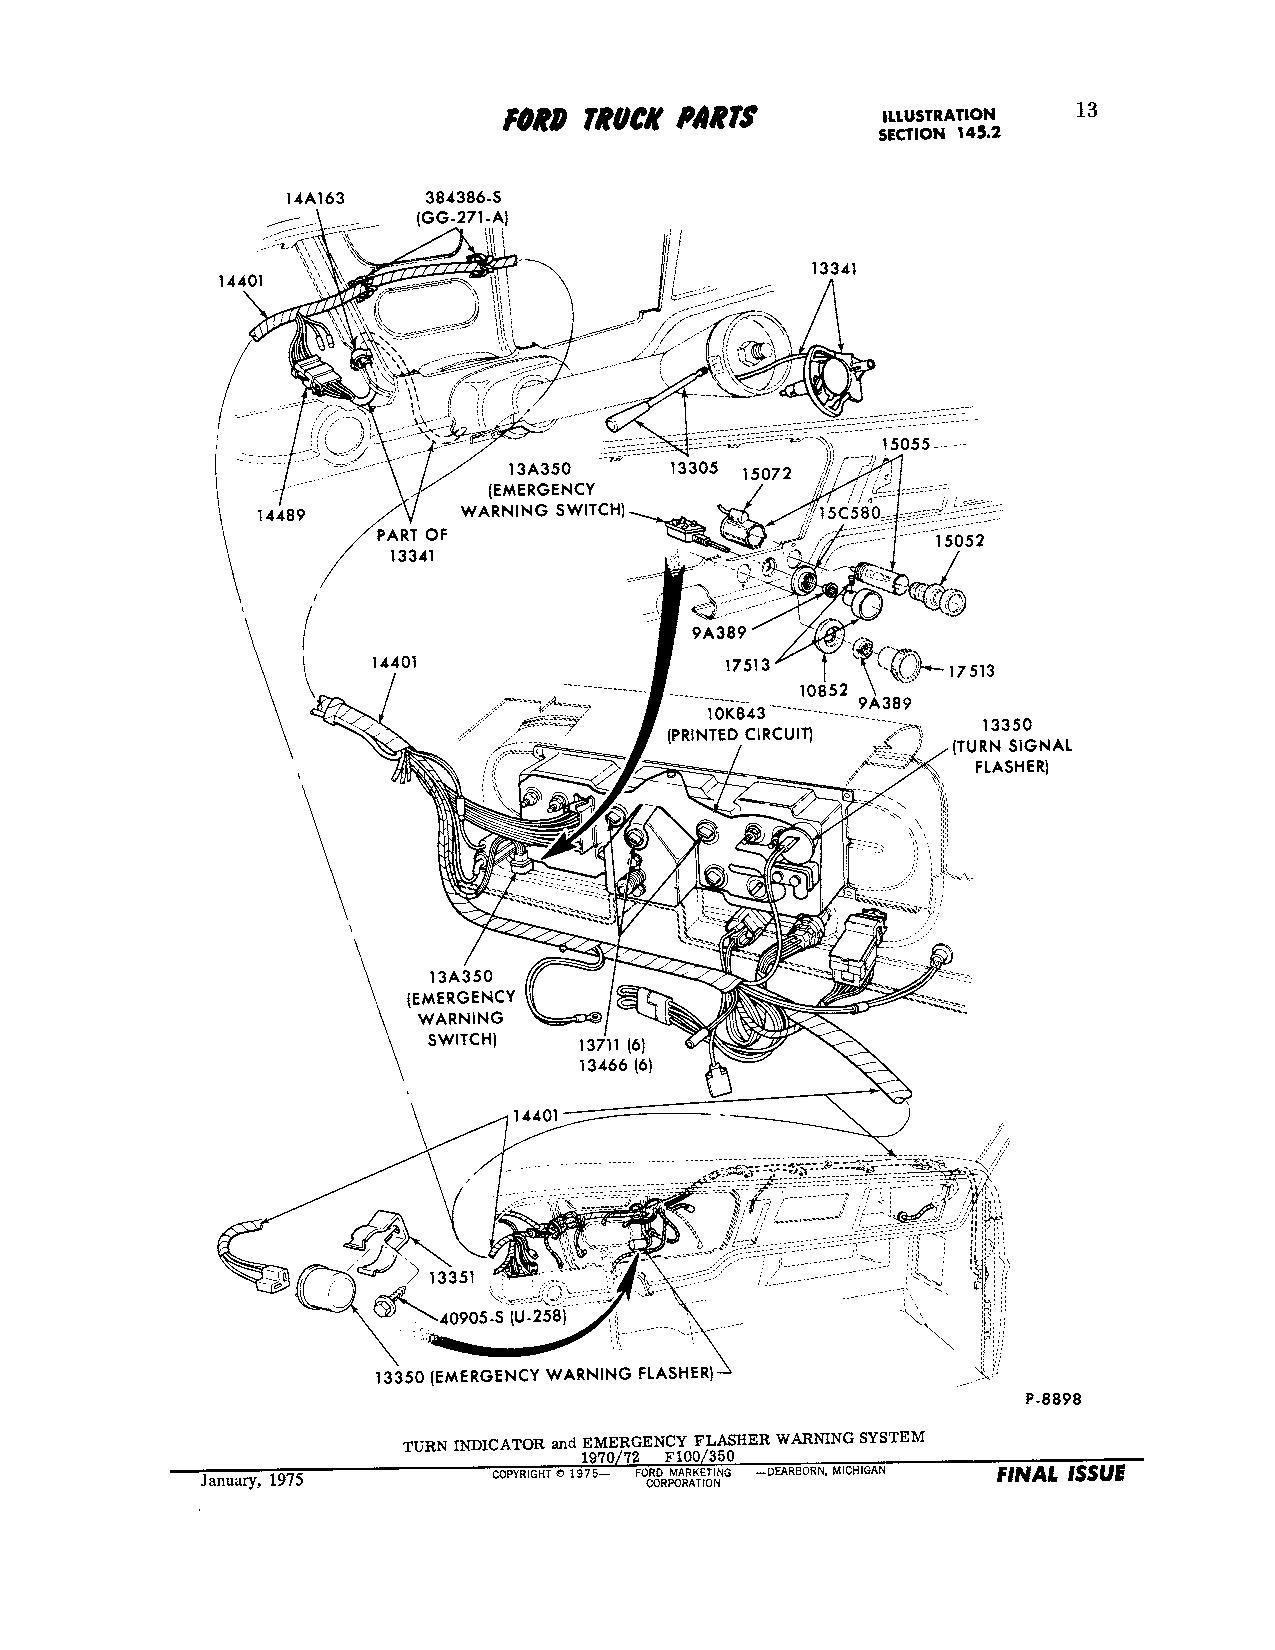 Steering column wiring question - Ford Truck Enthusiasts Forums